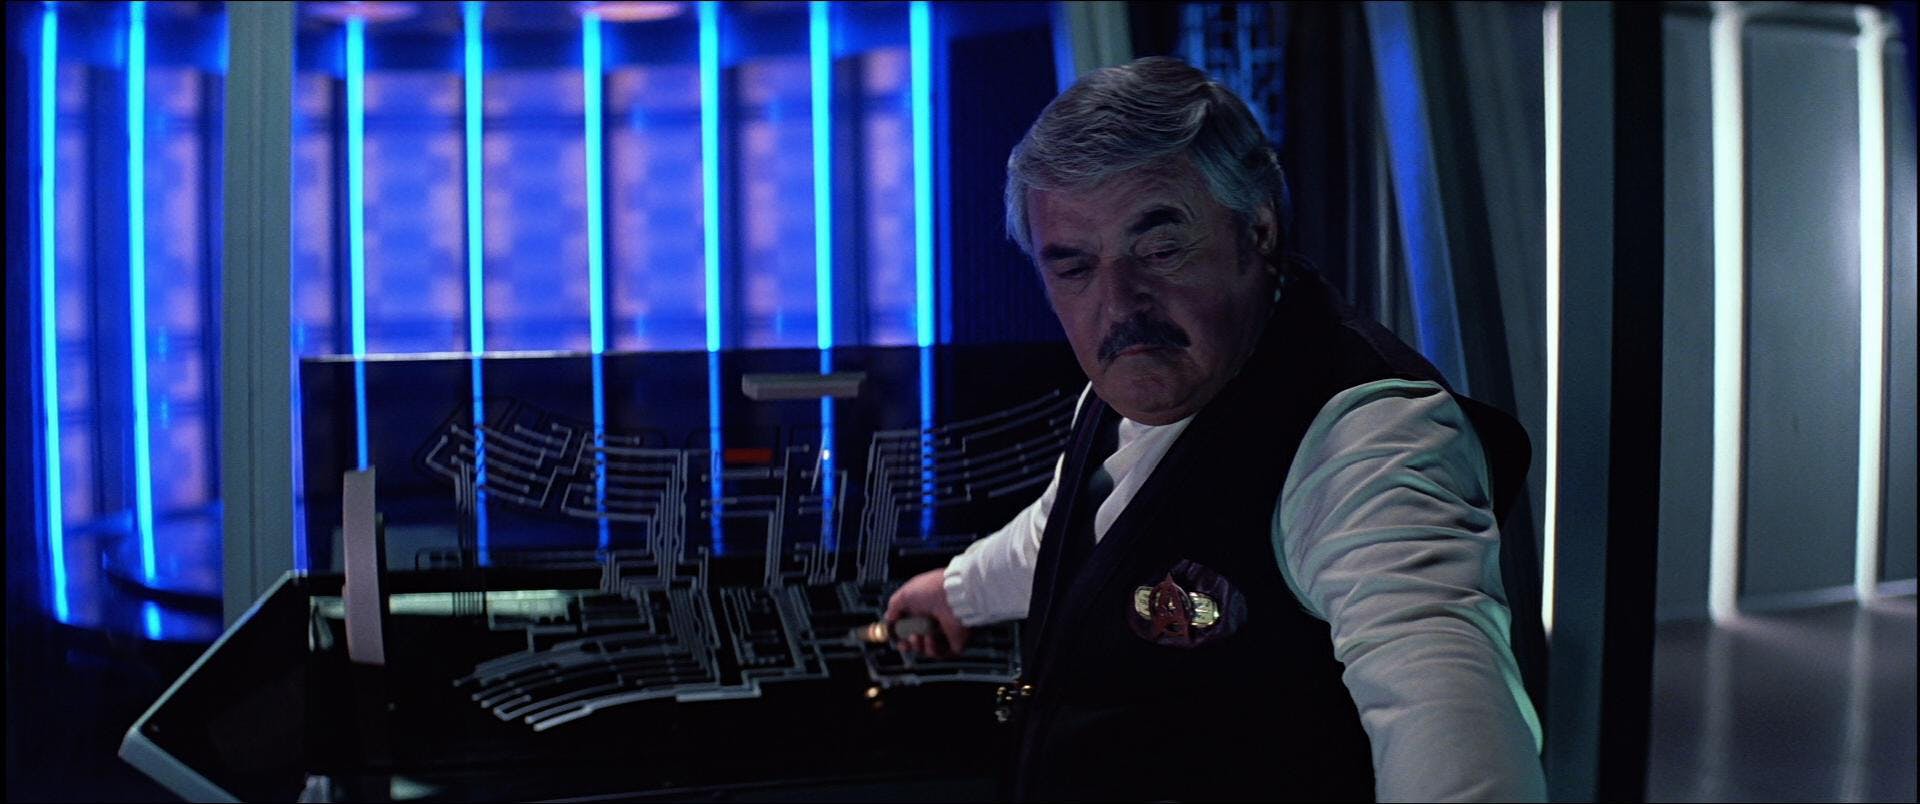 Montgomery Scott tinkers with the console in Star Trek V: The Final Frontier